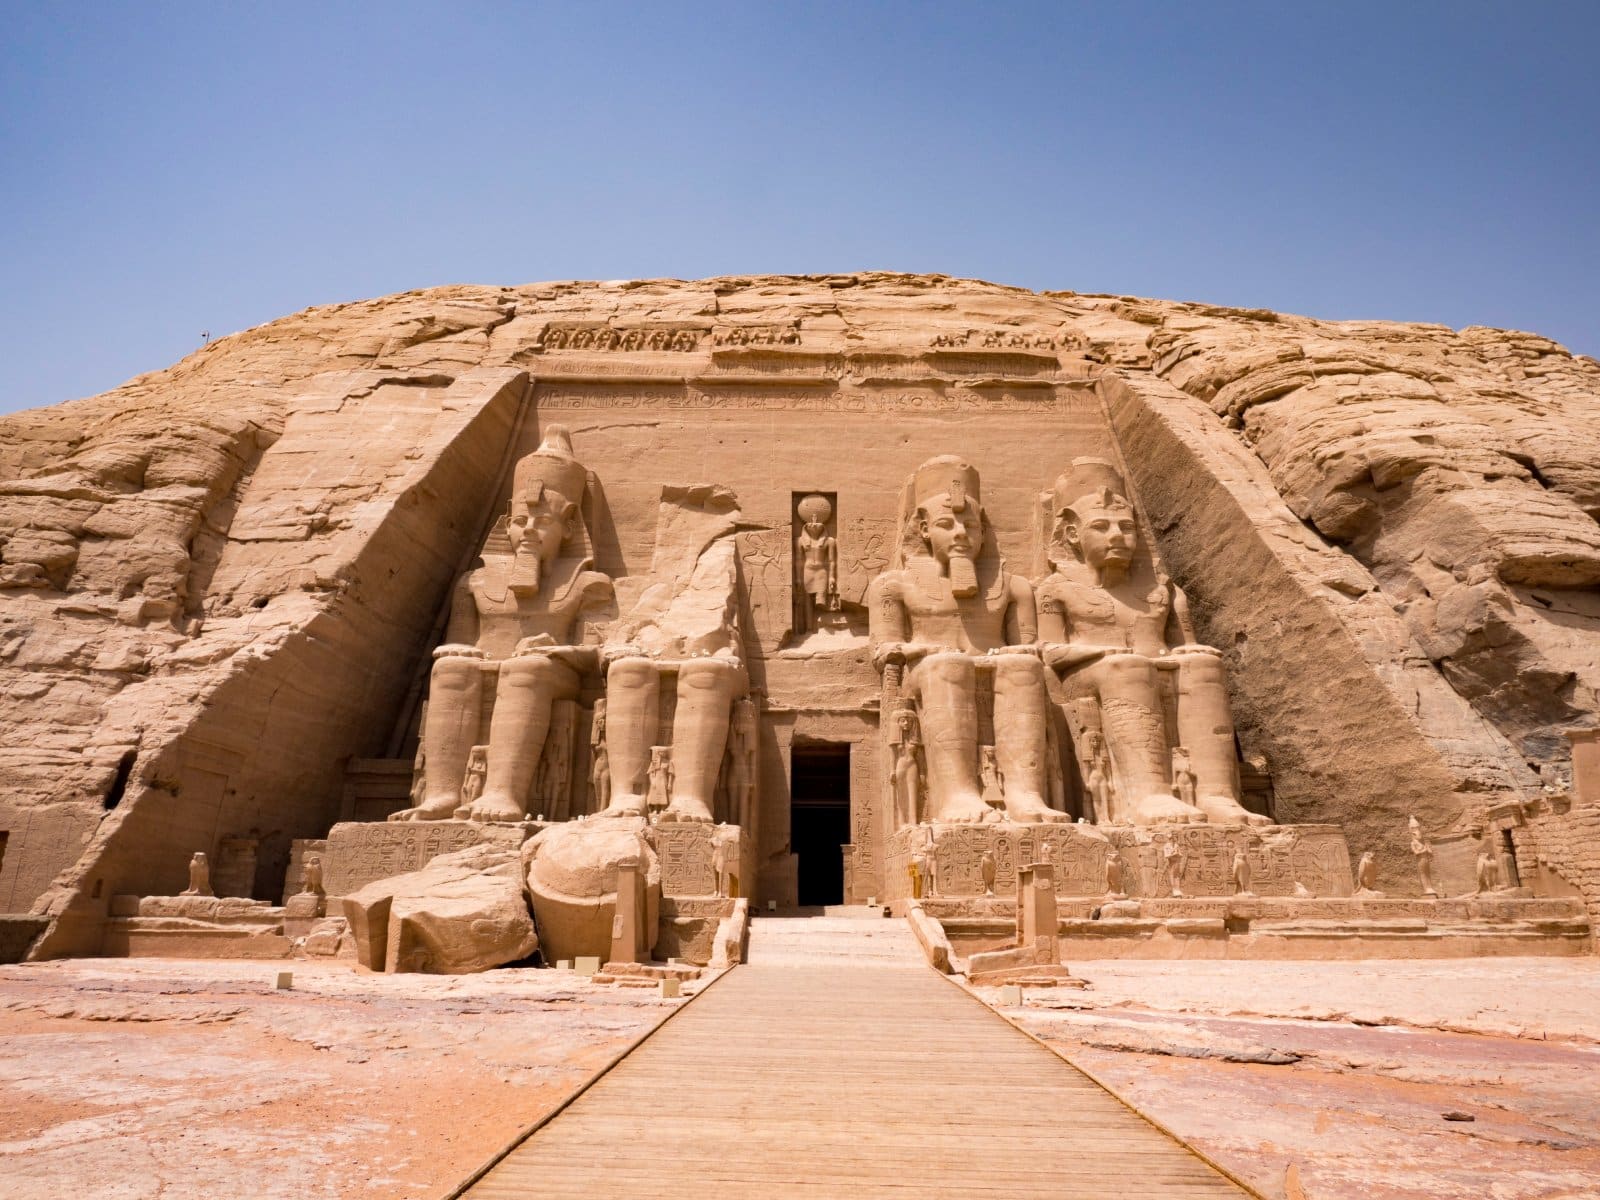 <p class="wp-caption-text">Image Credit: Shutterstock / doleesi</p>  <p><span>Abu Simbel remains one of Egypt’s most awe-inspiring sites, where Ramses II and his queen, Nefertari’s colossal temples overlook Lake Nasser. Constructed in the 13th century BC, these temples were an assertion of Ramses II’s divine might and his love for Nefertari. The relocation of these temples in the 1960s, a monumental effort to save them from the rising waters of Lake Nasser due to the Aswan High Dam, stands as a testament to global cooperation for preserving cultural heritage. The grandeur of the statues, the intricate wall carvings depicting victorious battles, and the alignment of the sun during the Sun Festival, illuminating the inner sanctum, all contribute to the site’s mystique and grandiosity.</span></p>